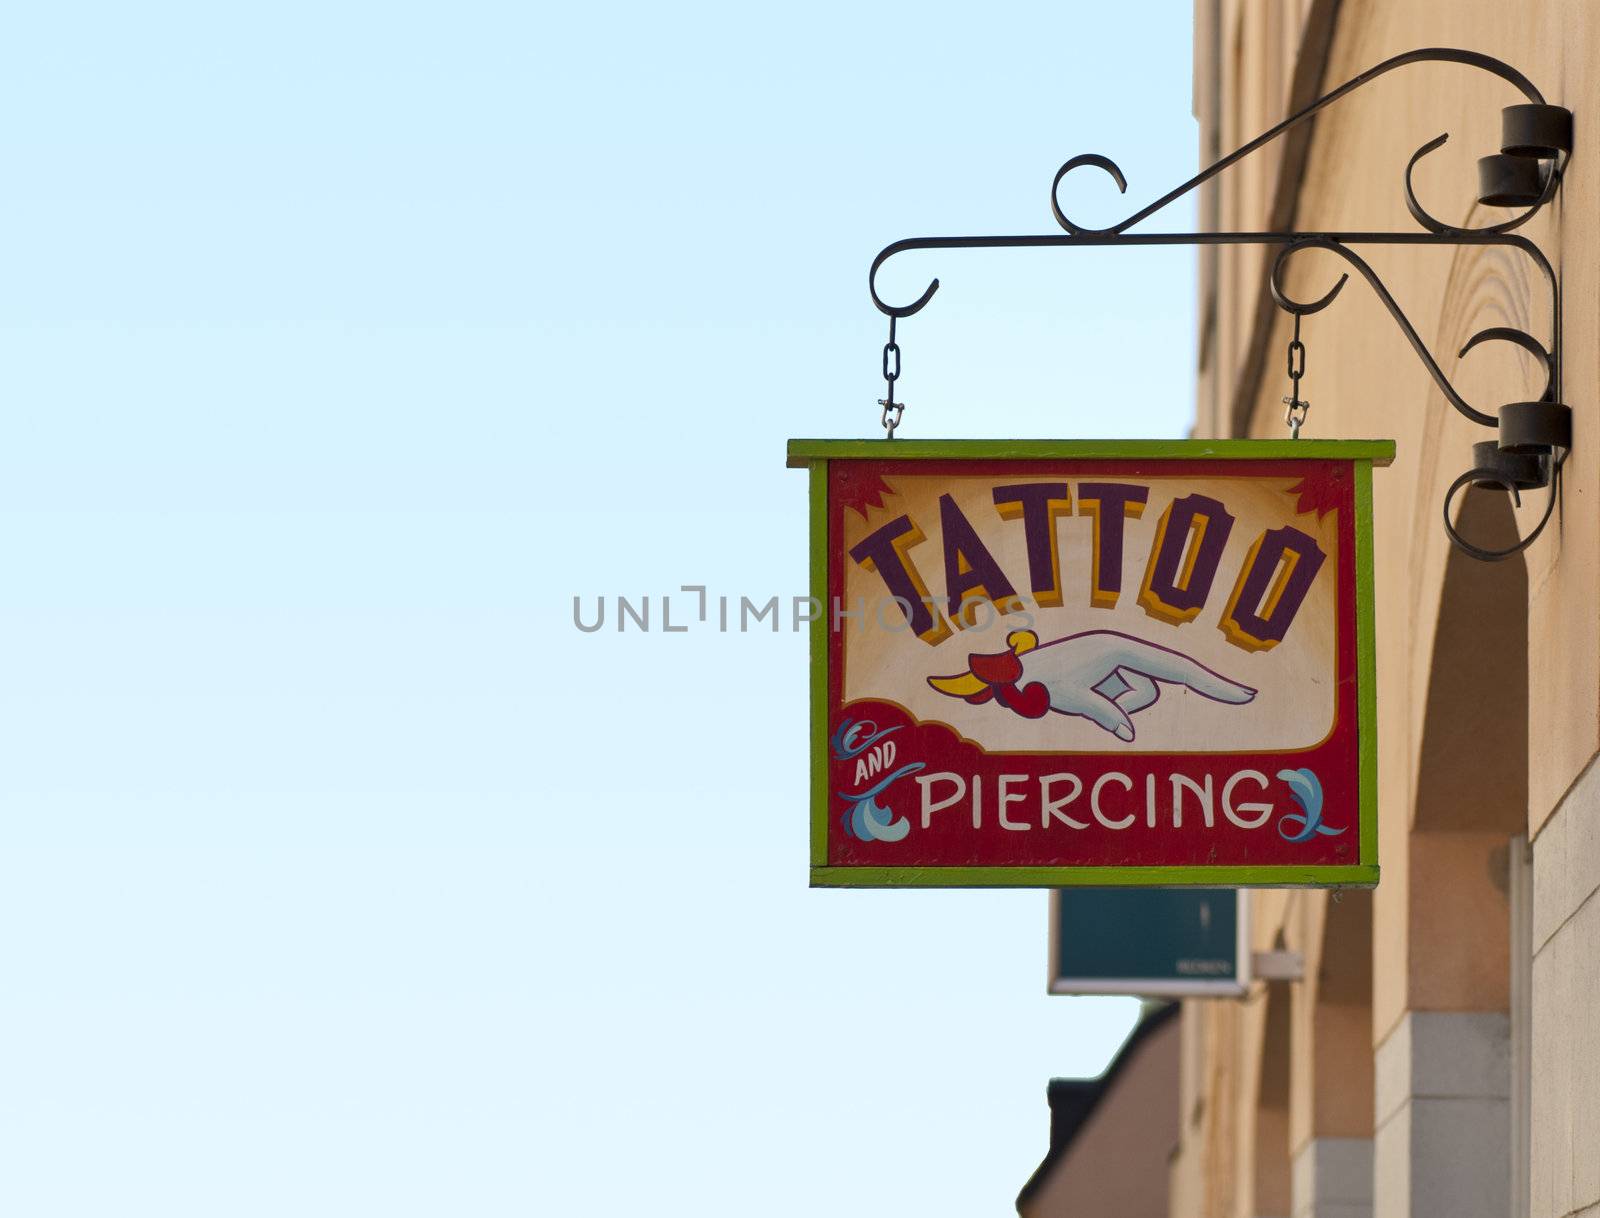 Tattoo and piercing sign by bah69